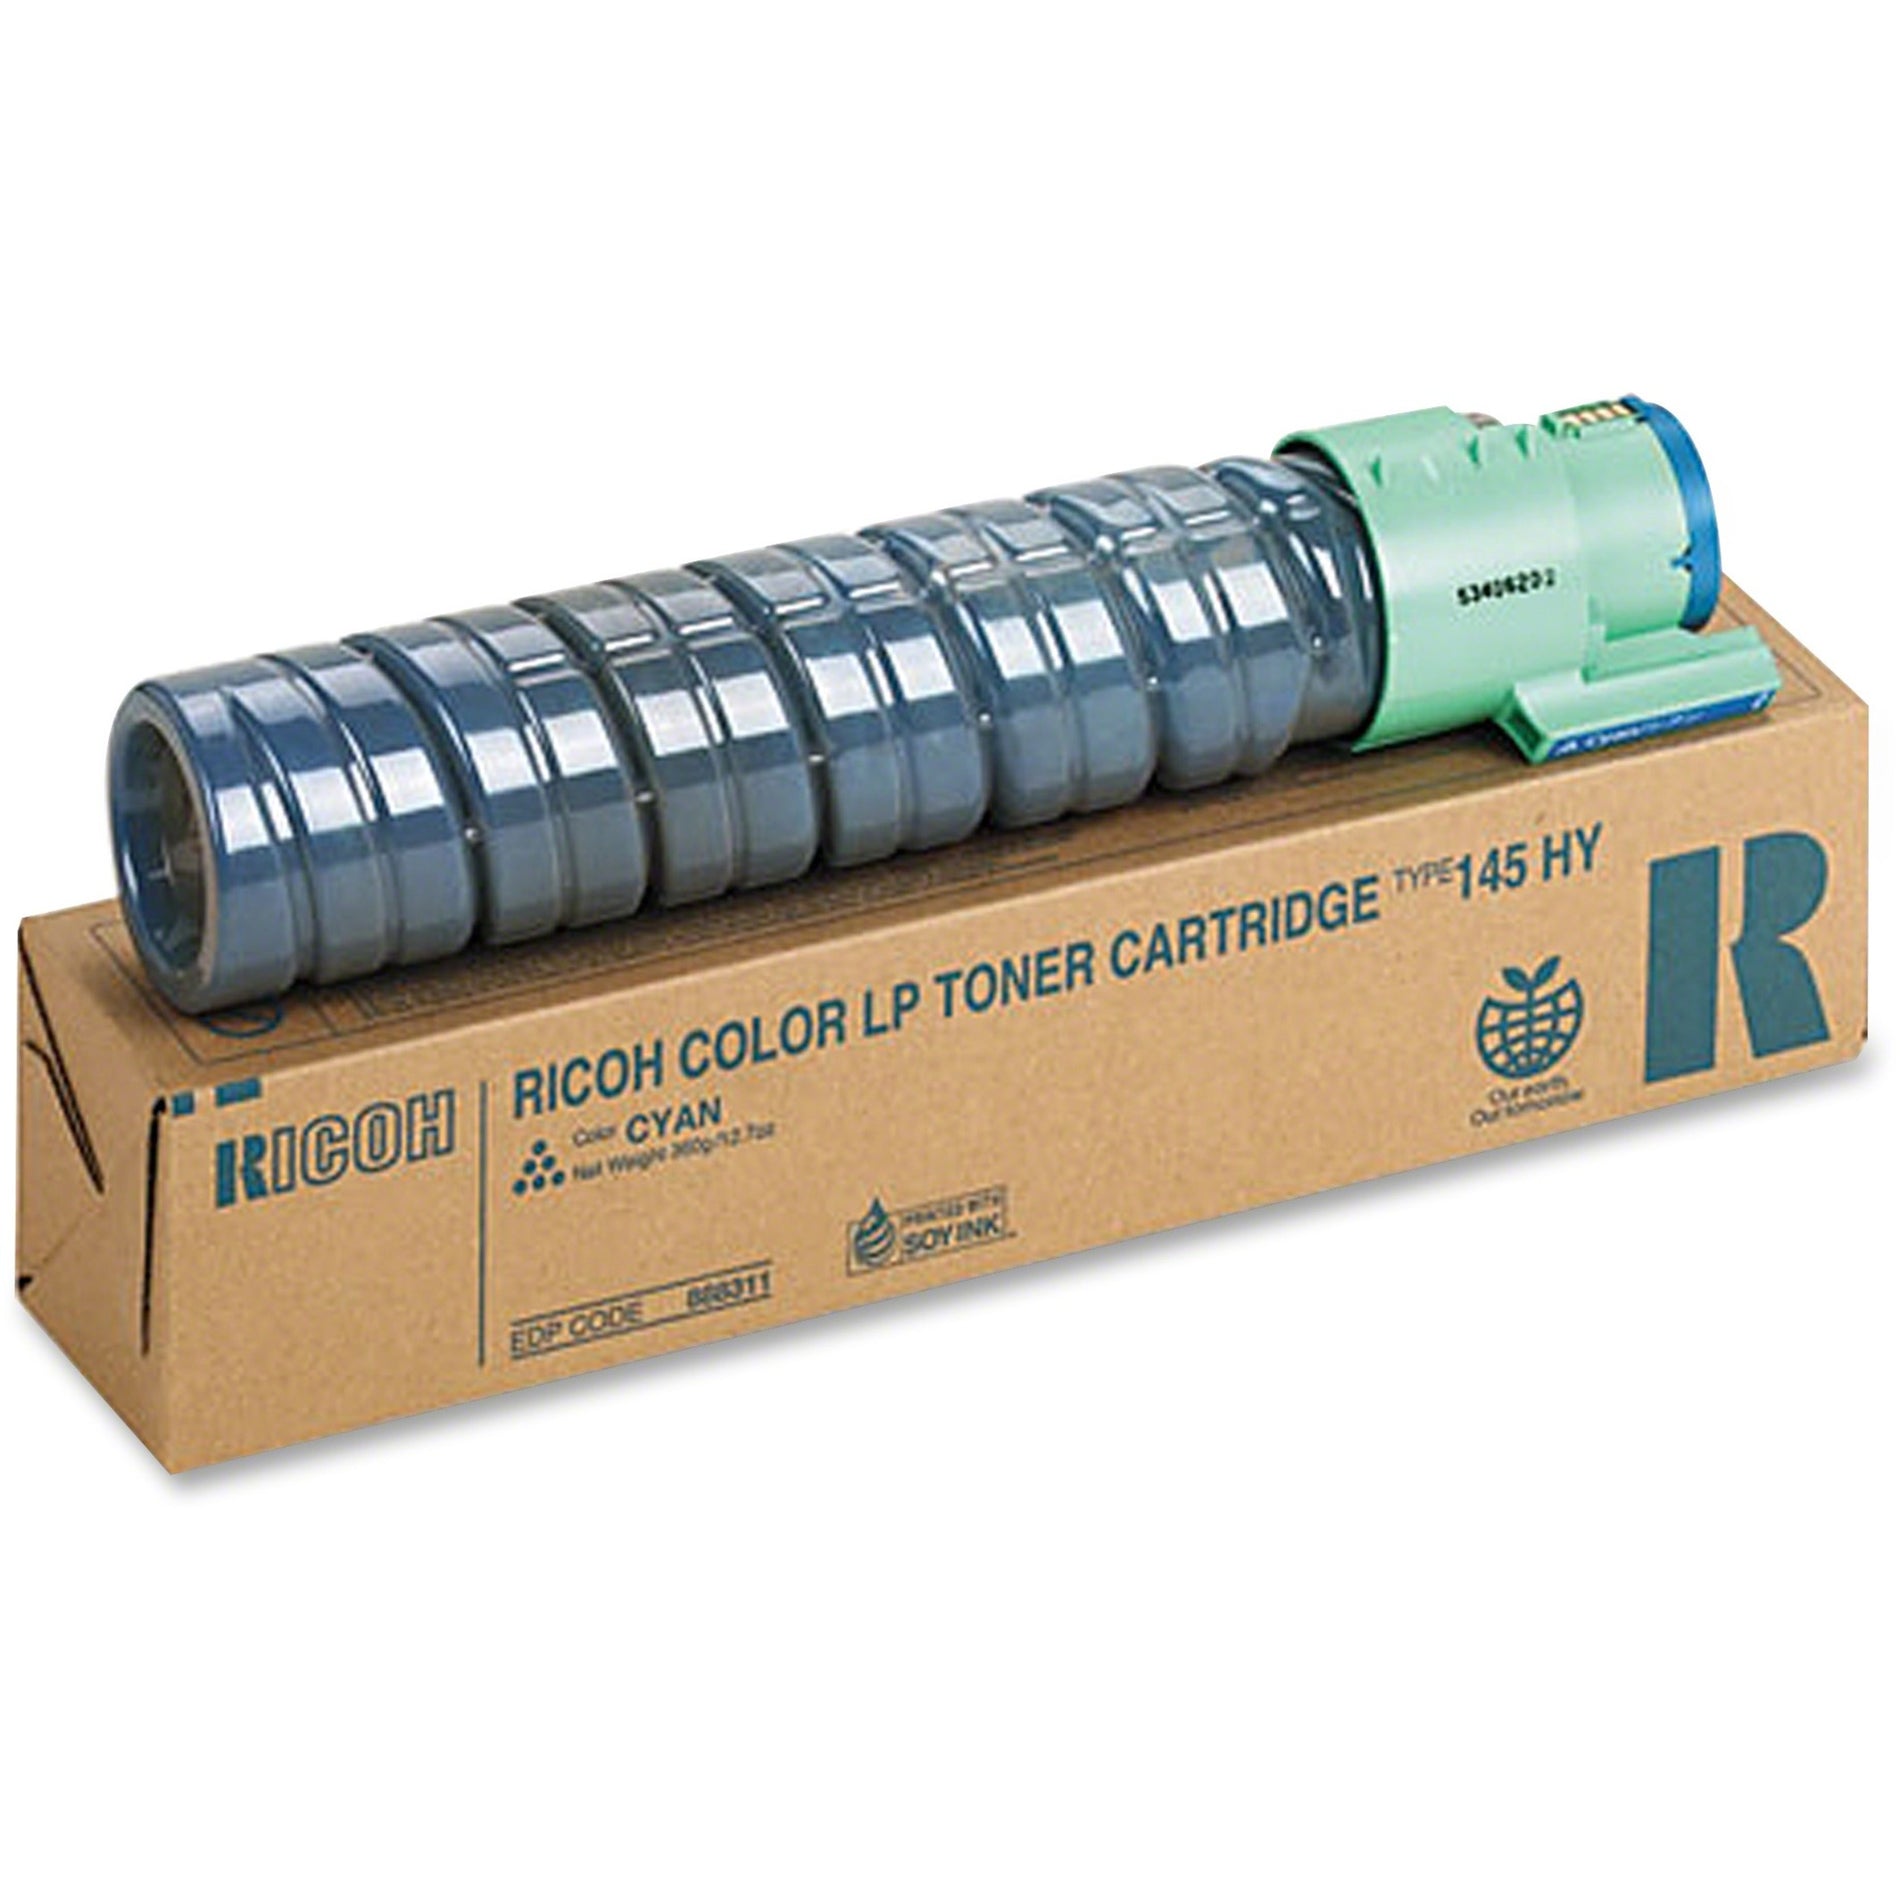 Ricoh 888311 Aficio CL4000DN Type 145 Toner Cartridge, Cyan - High Yield, 15,000 Pages